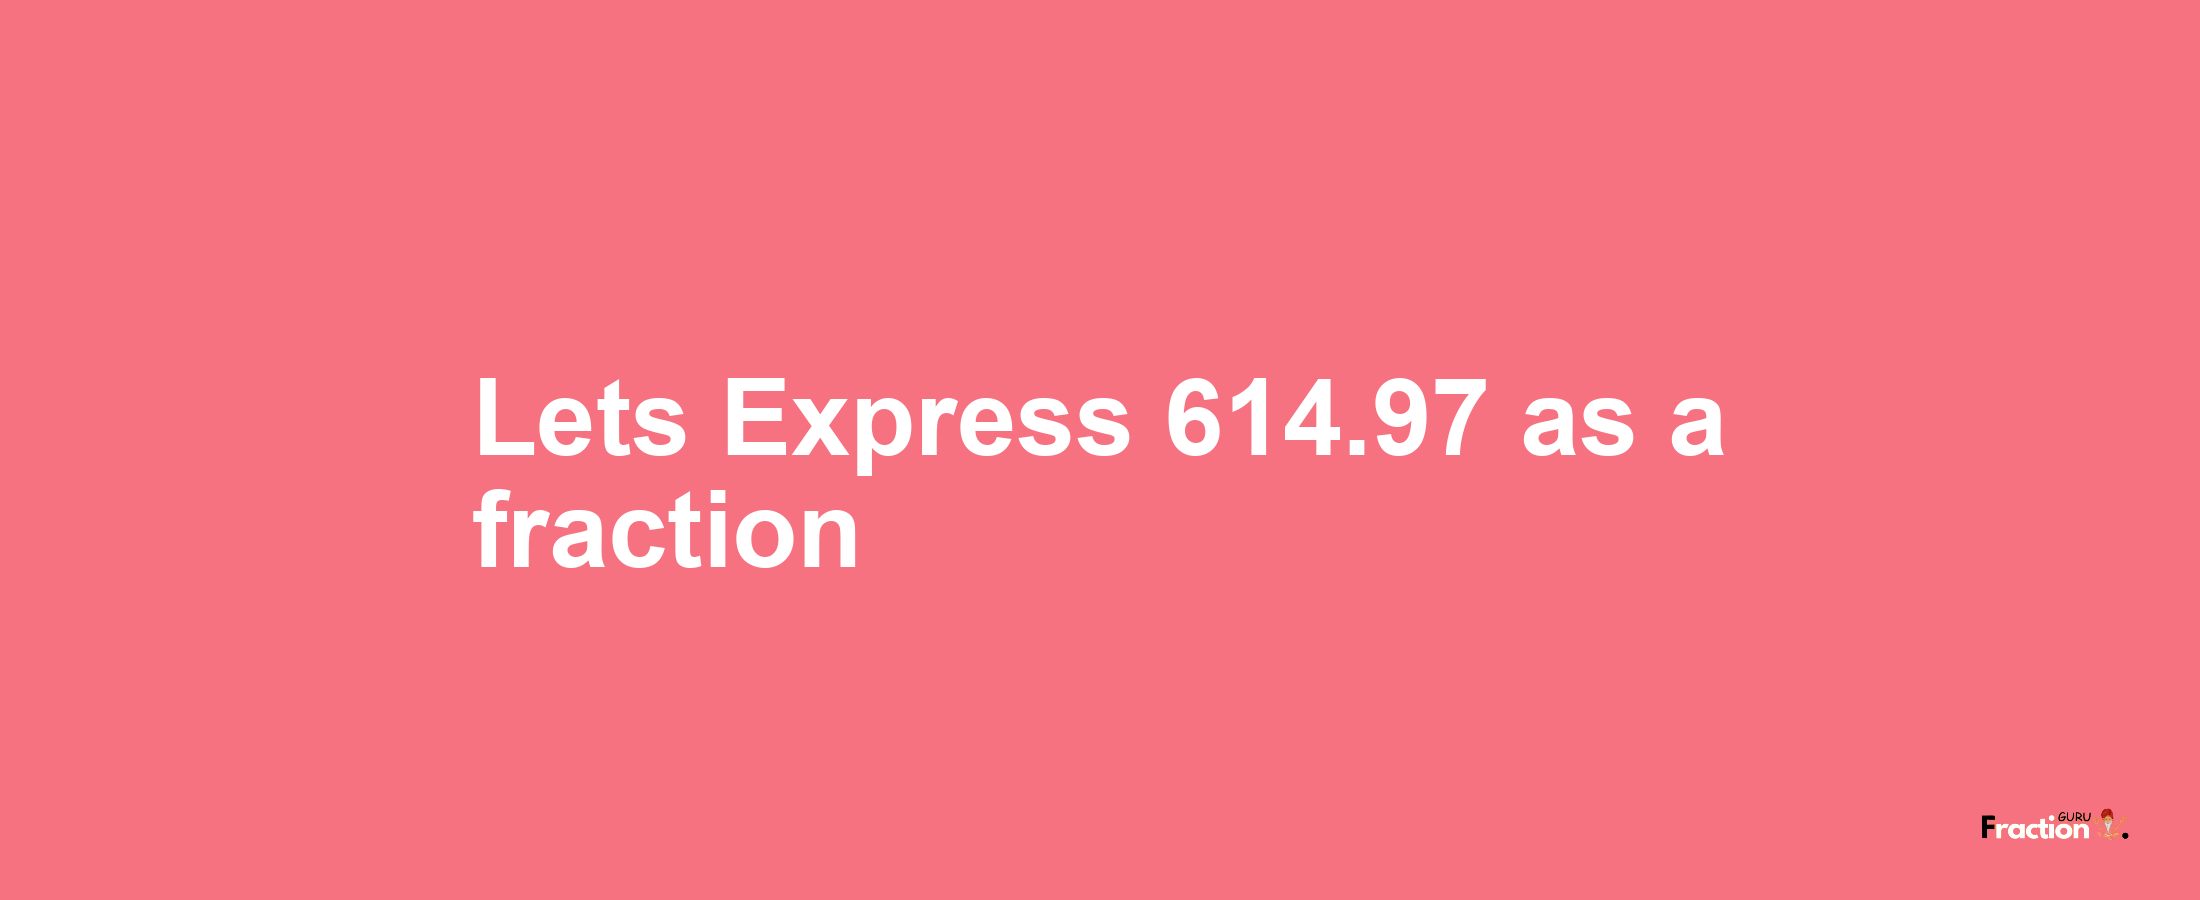 Lets Express 614.97 as afraction